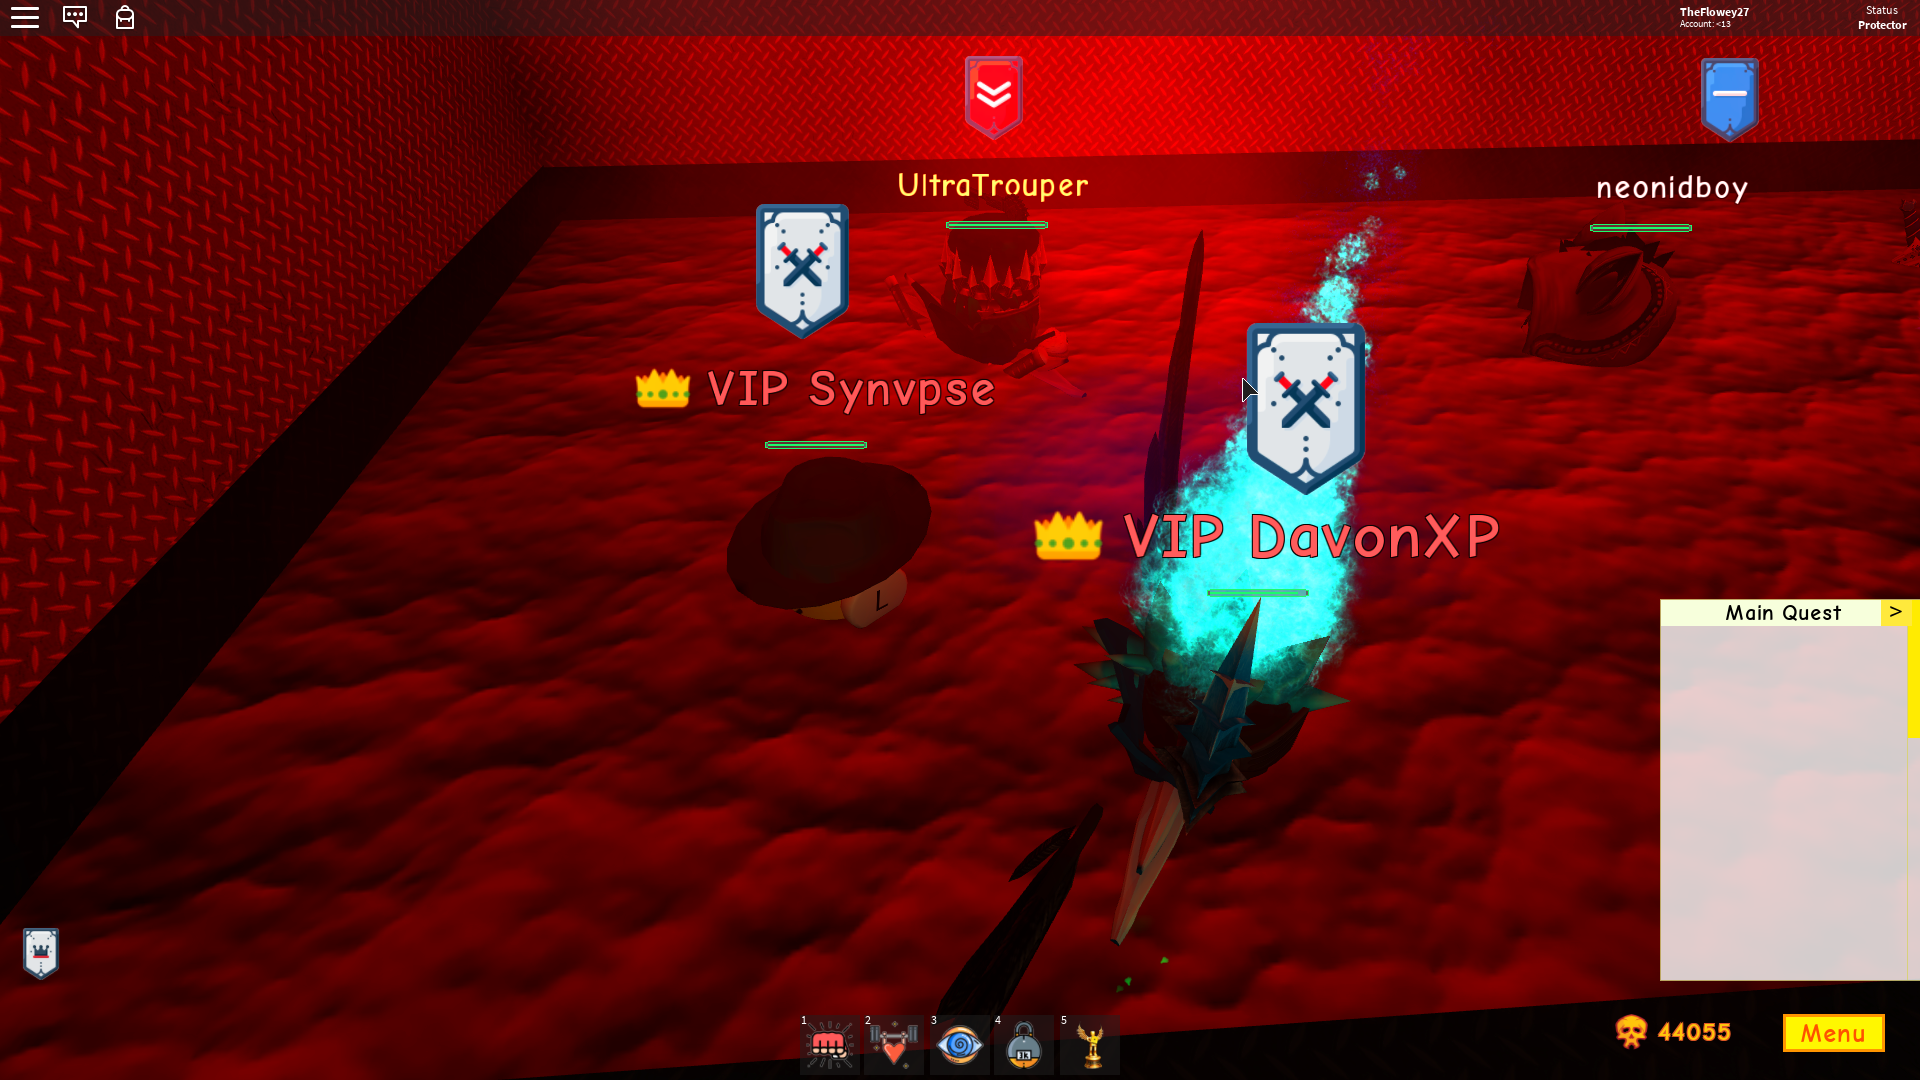 I Met Davonxp And Synvpse In The Same Game Fandom